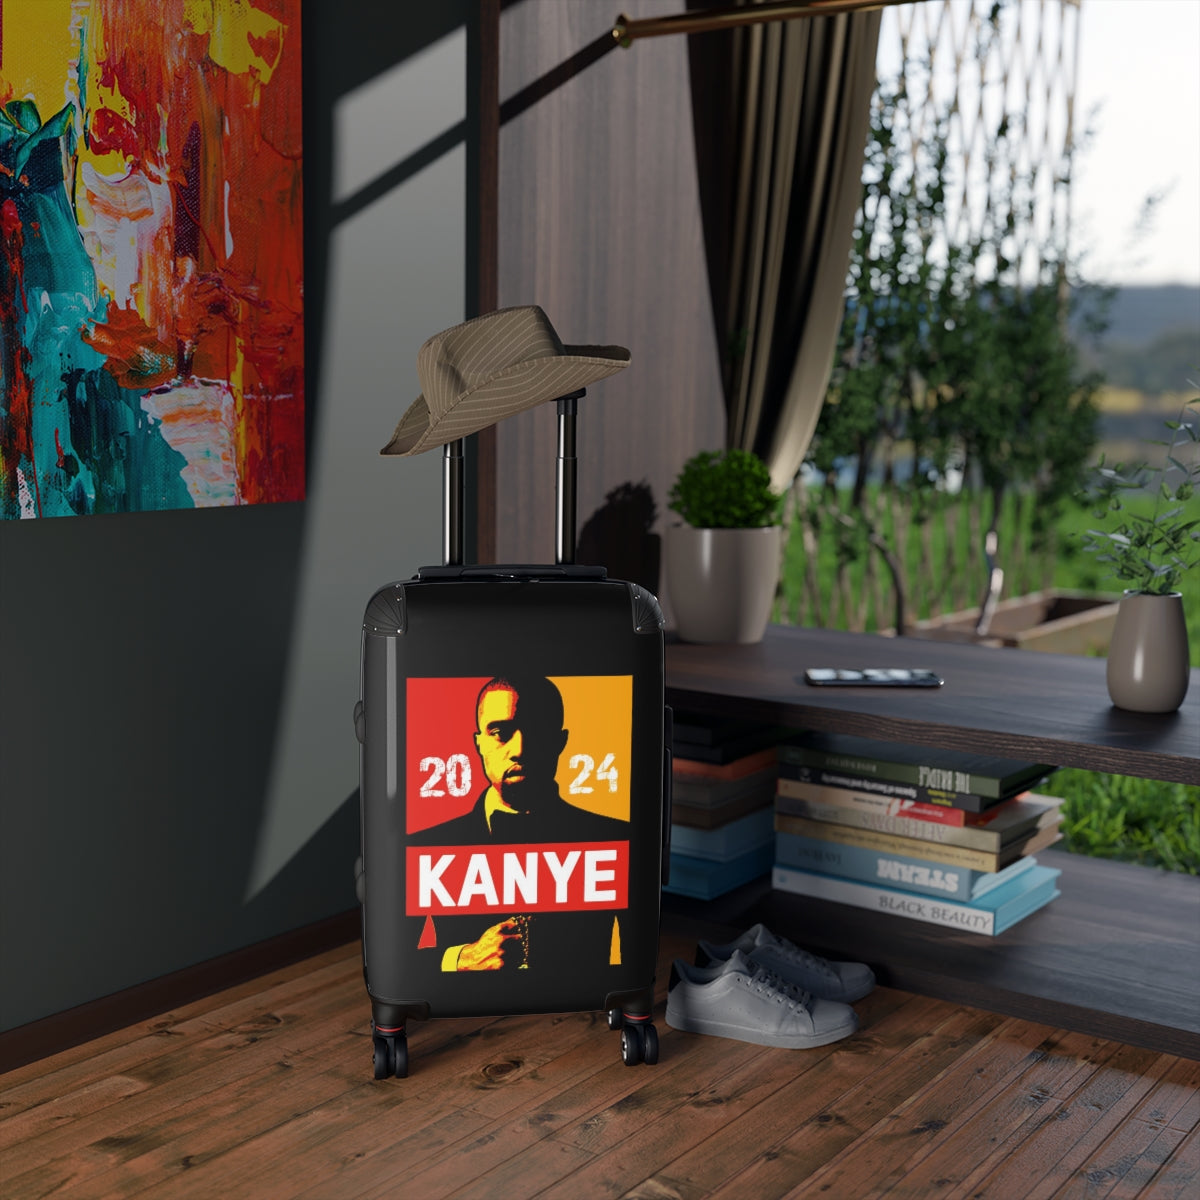 Getrott Kanye West for President 2024 Black Red Yellow Cabin Suitcase Inner Pockets Extended Storage Adjustable Telescopic Handle Inner Pockets Double wheeled Polycarbonate Hard-shell Built-in Lock